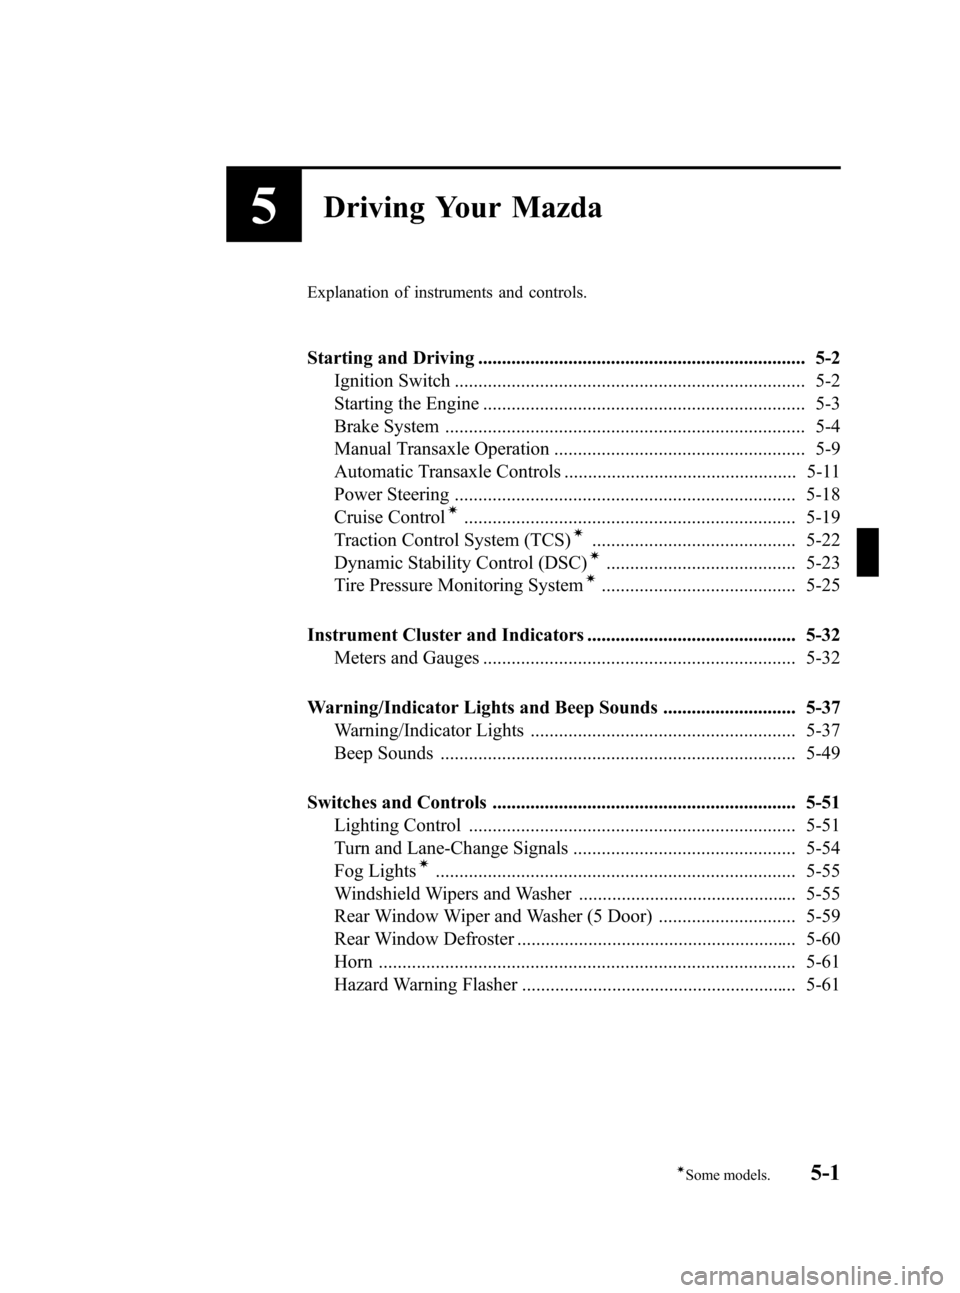 MAZDA MODEL 3 HATCHBACK 2007   (in English) User Guide Black plate (123,1)
5Driving Your Mazda
Explanation of instruments and controls.
Starting and Driving ..................................................................... 5-2
Ignition Switch ........